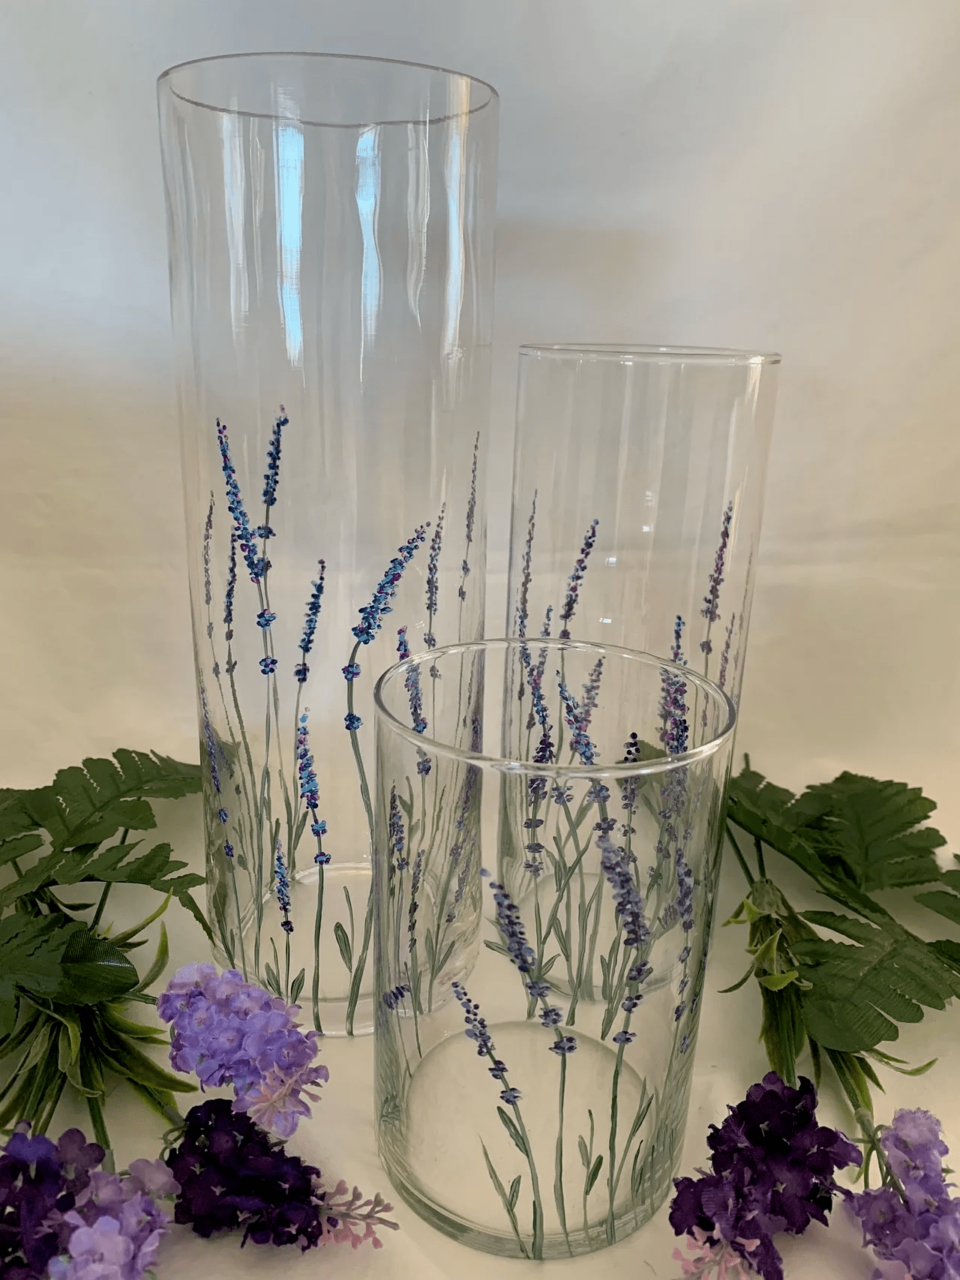 flower vases with lavender painted on